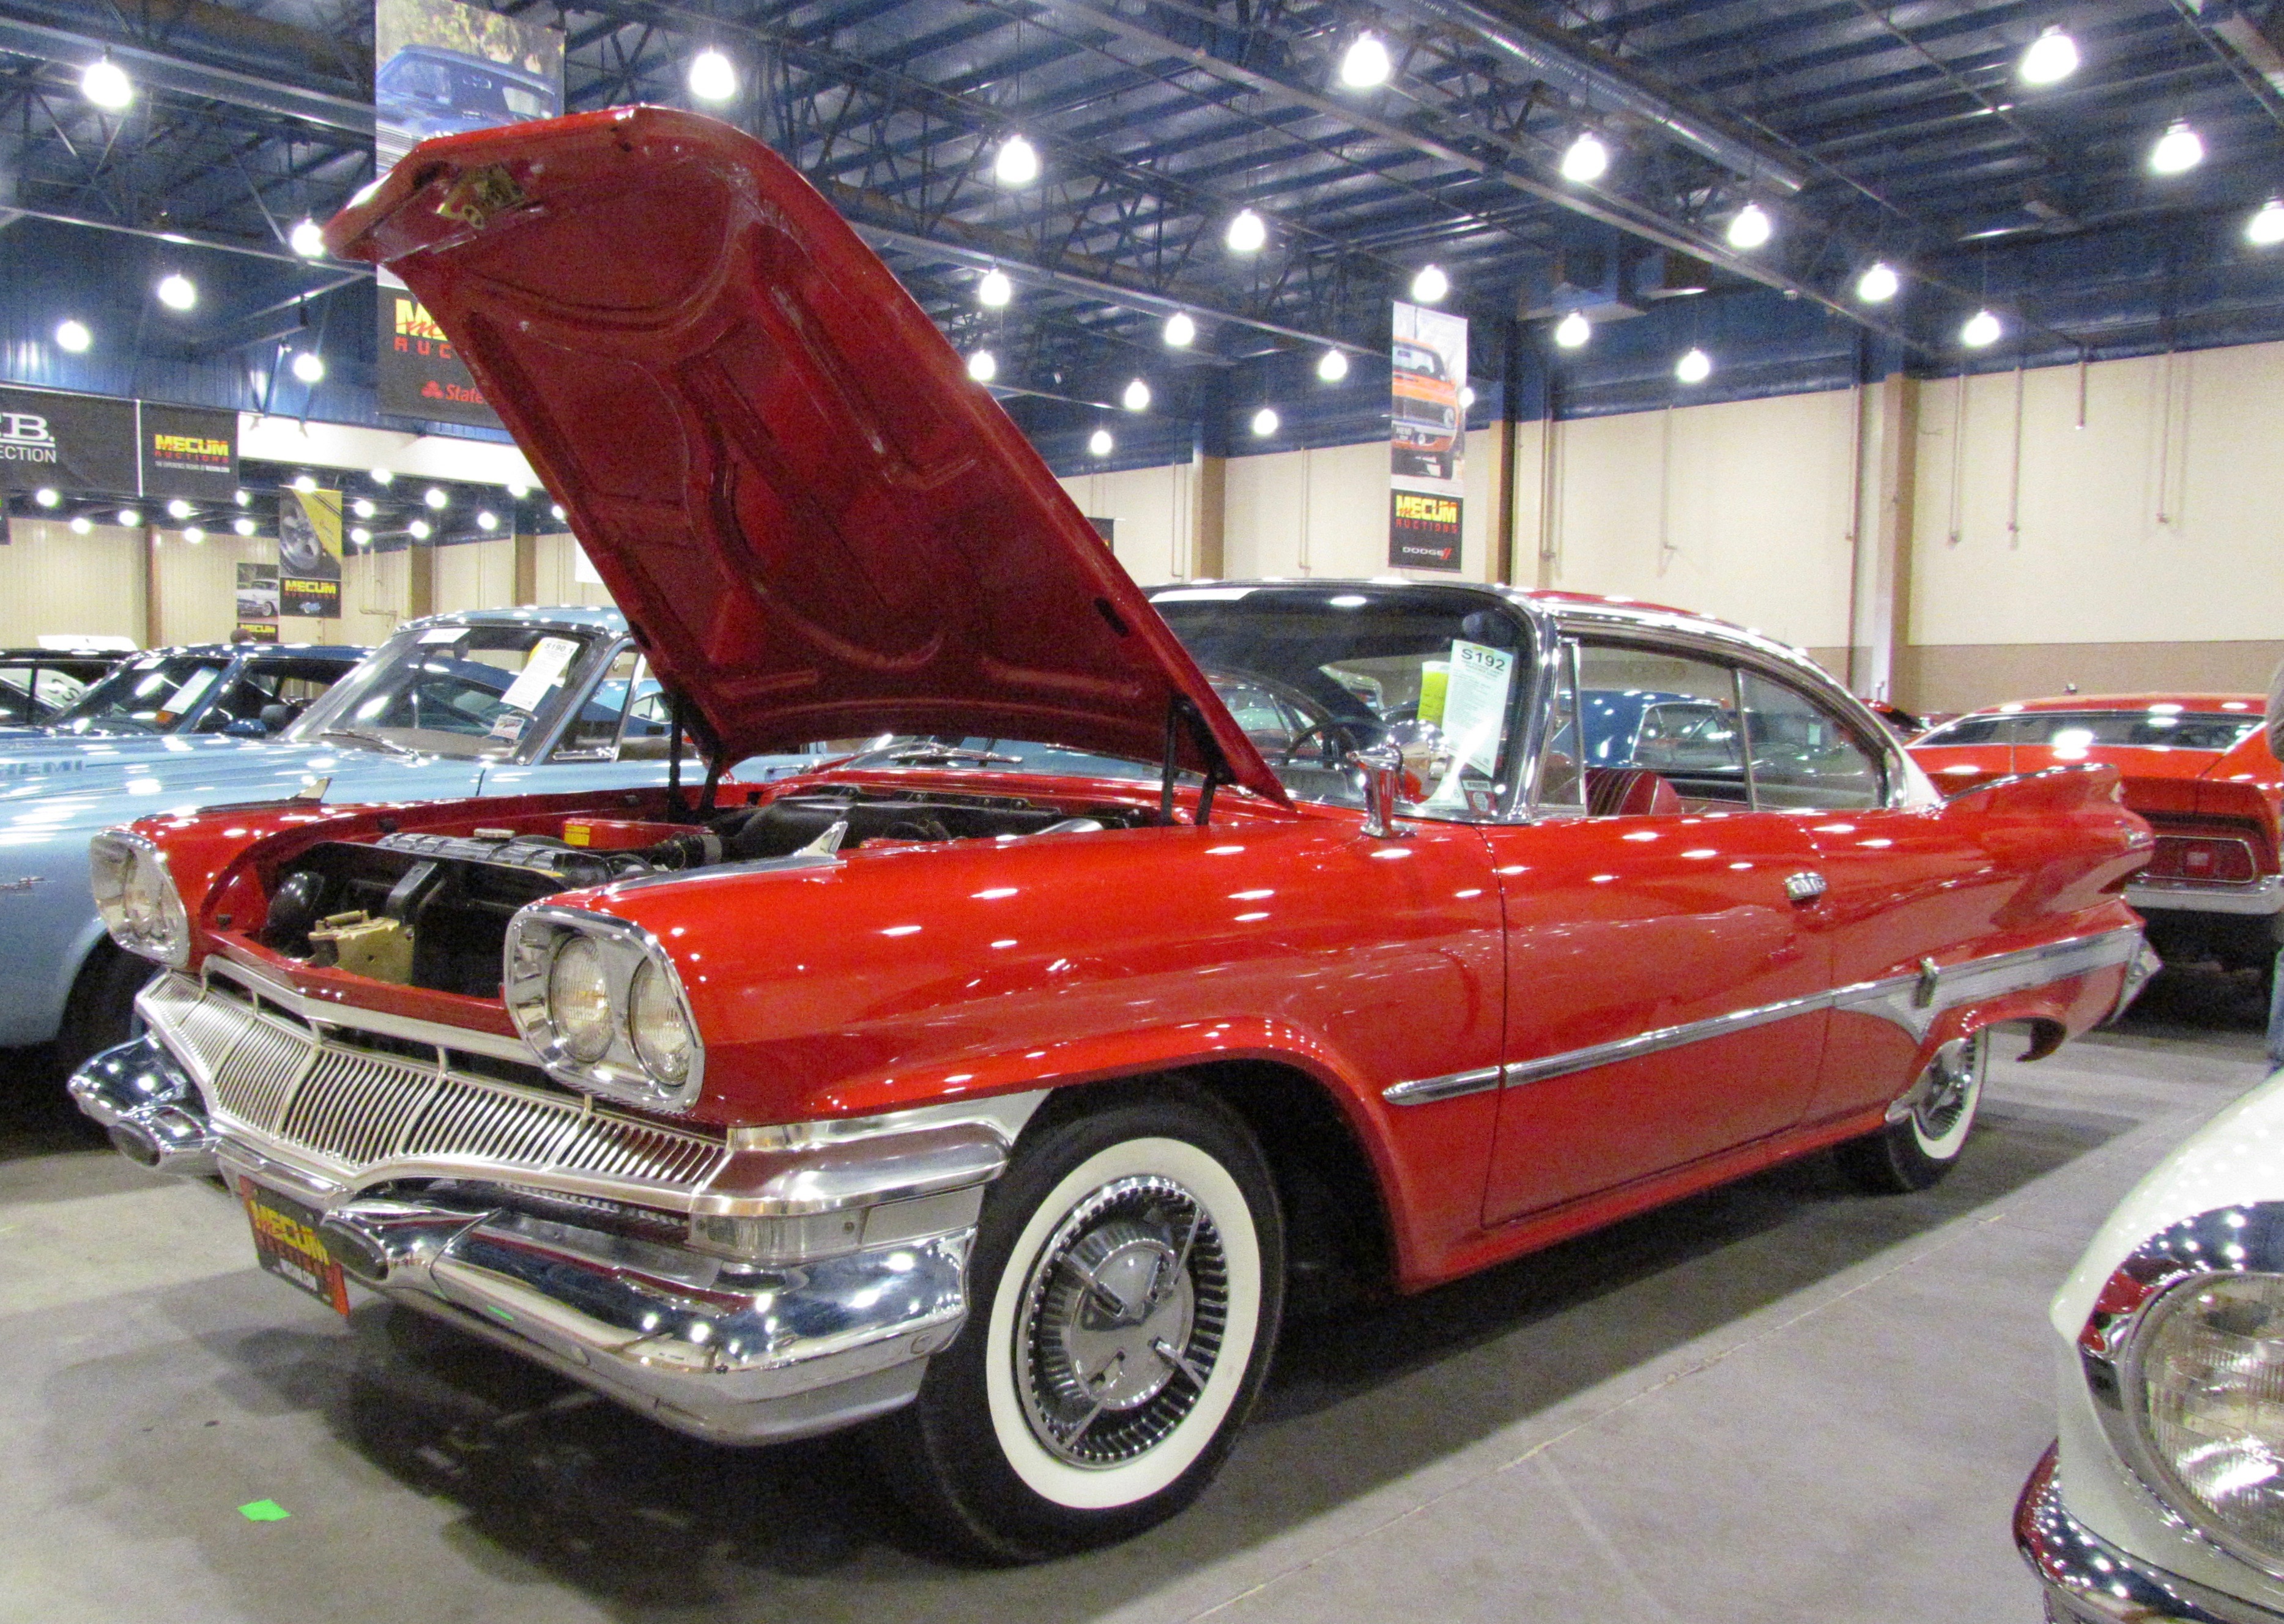 , Larry’s likes at Mecum’s Kissimmee auction, ClassicCars.com Journal